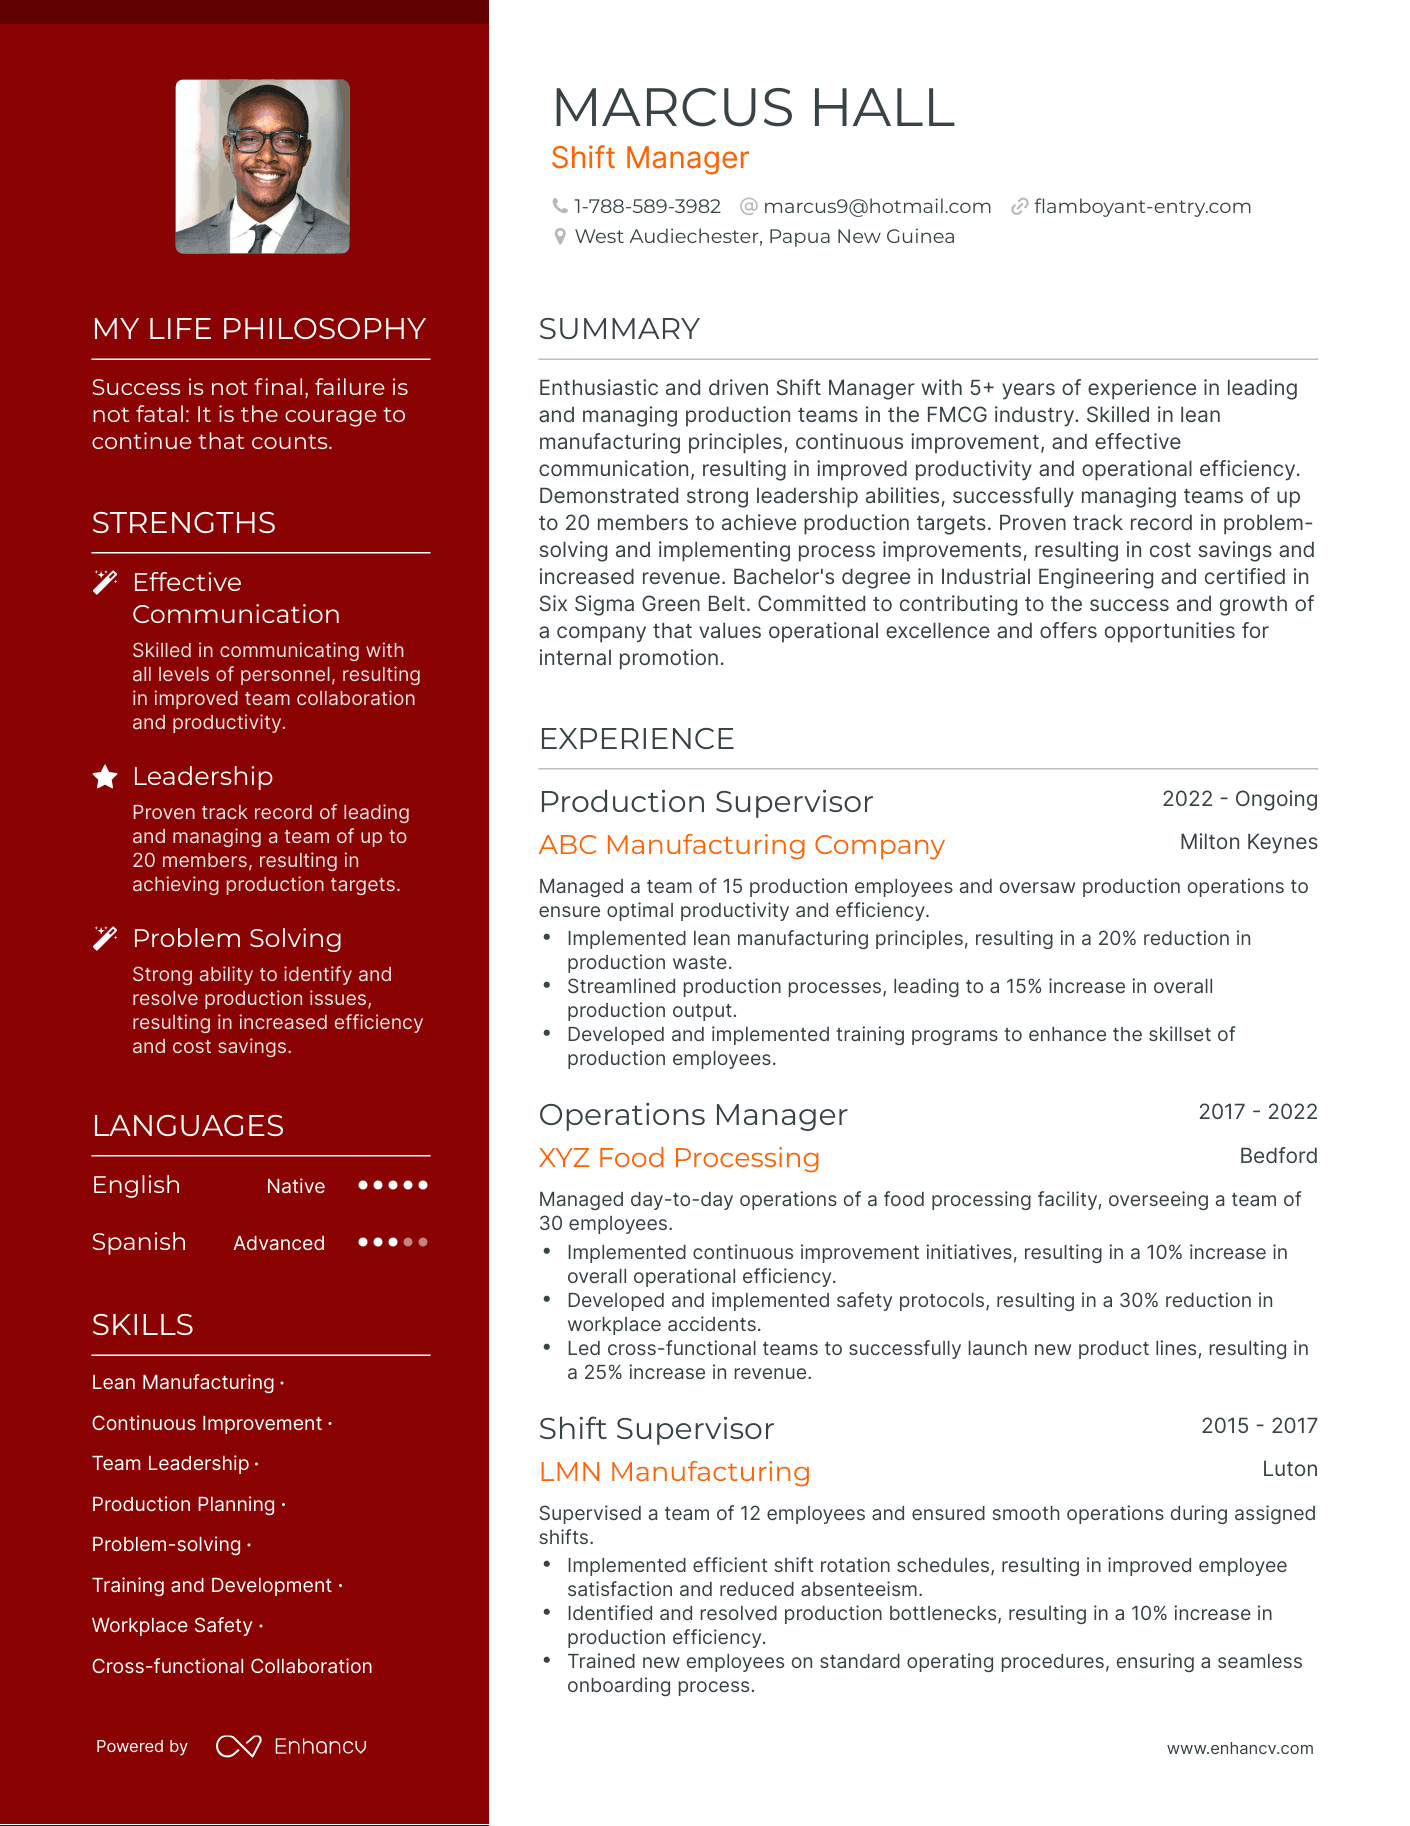 Shift Manager resume example